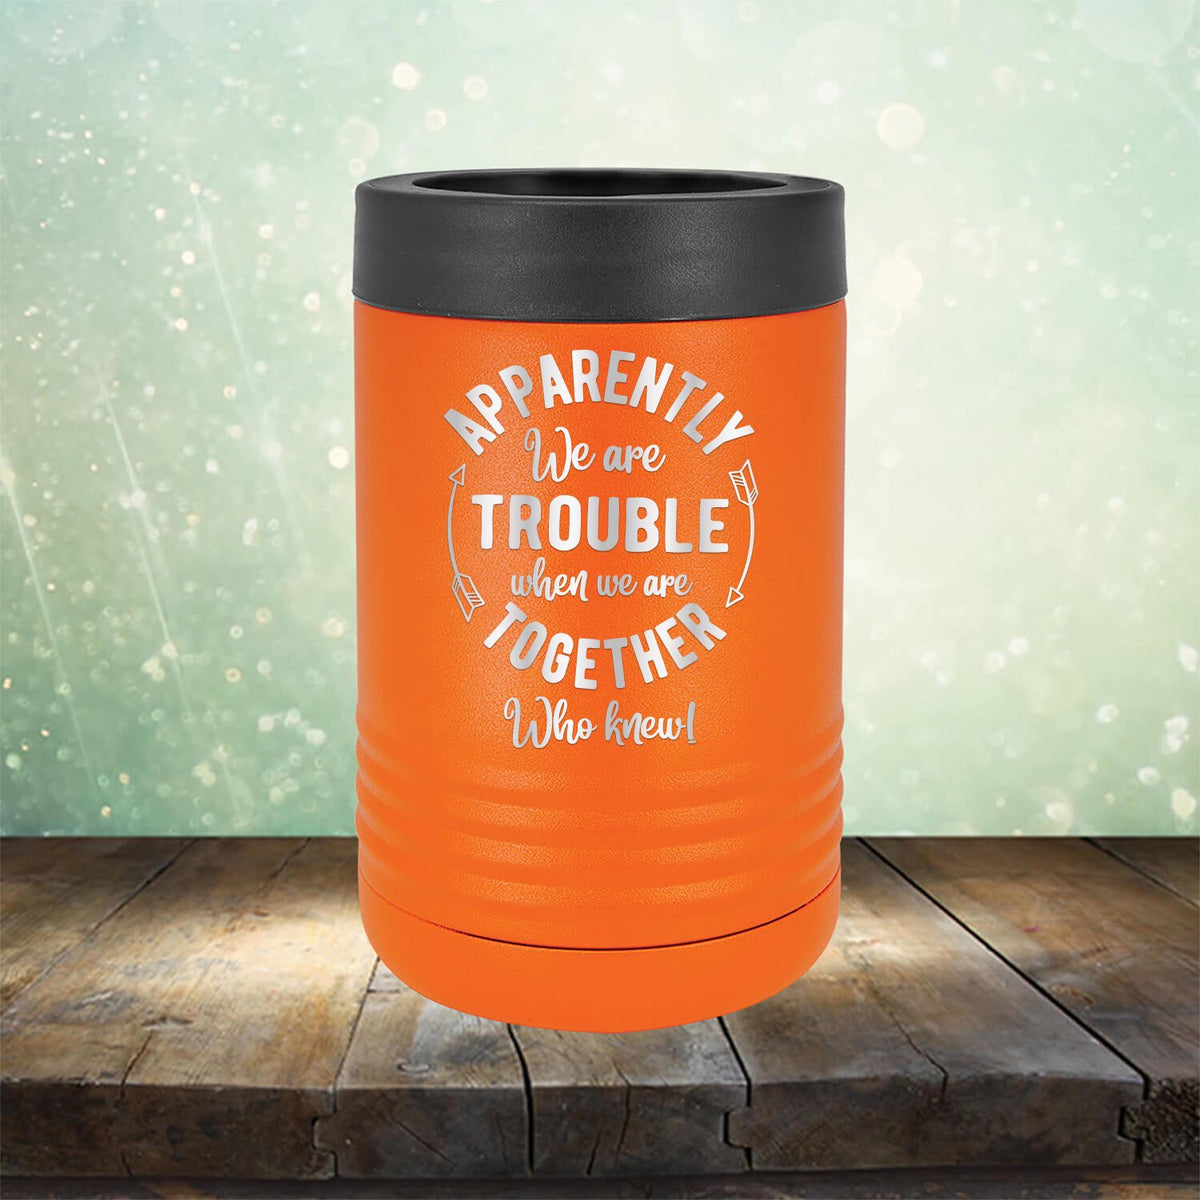 Apparently We Are Trouble When We Are Together Who Knew - Laser Etched Tumbler Mug